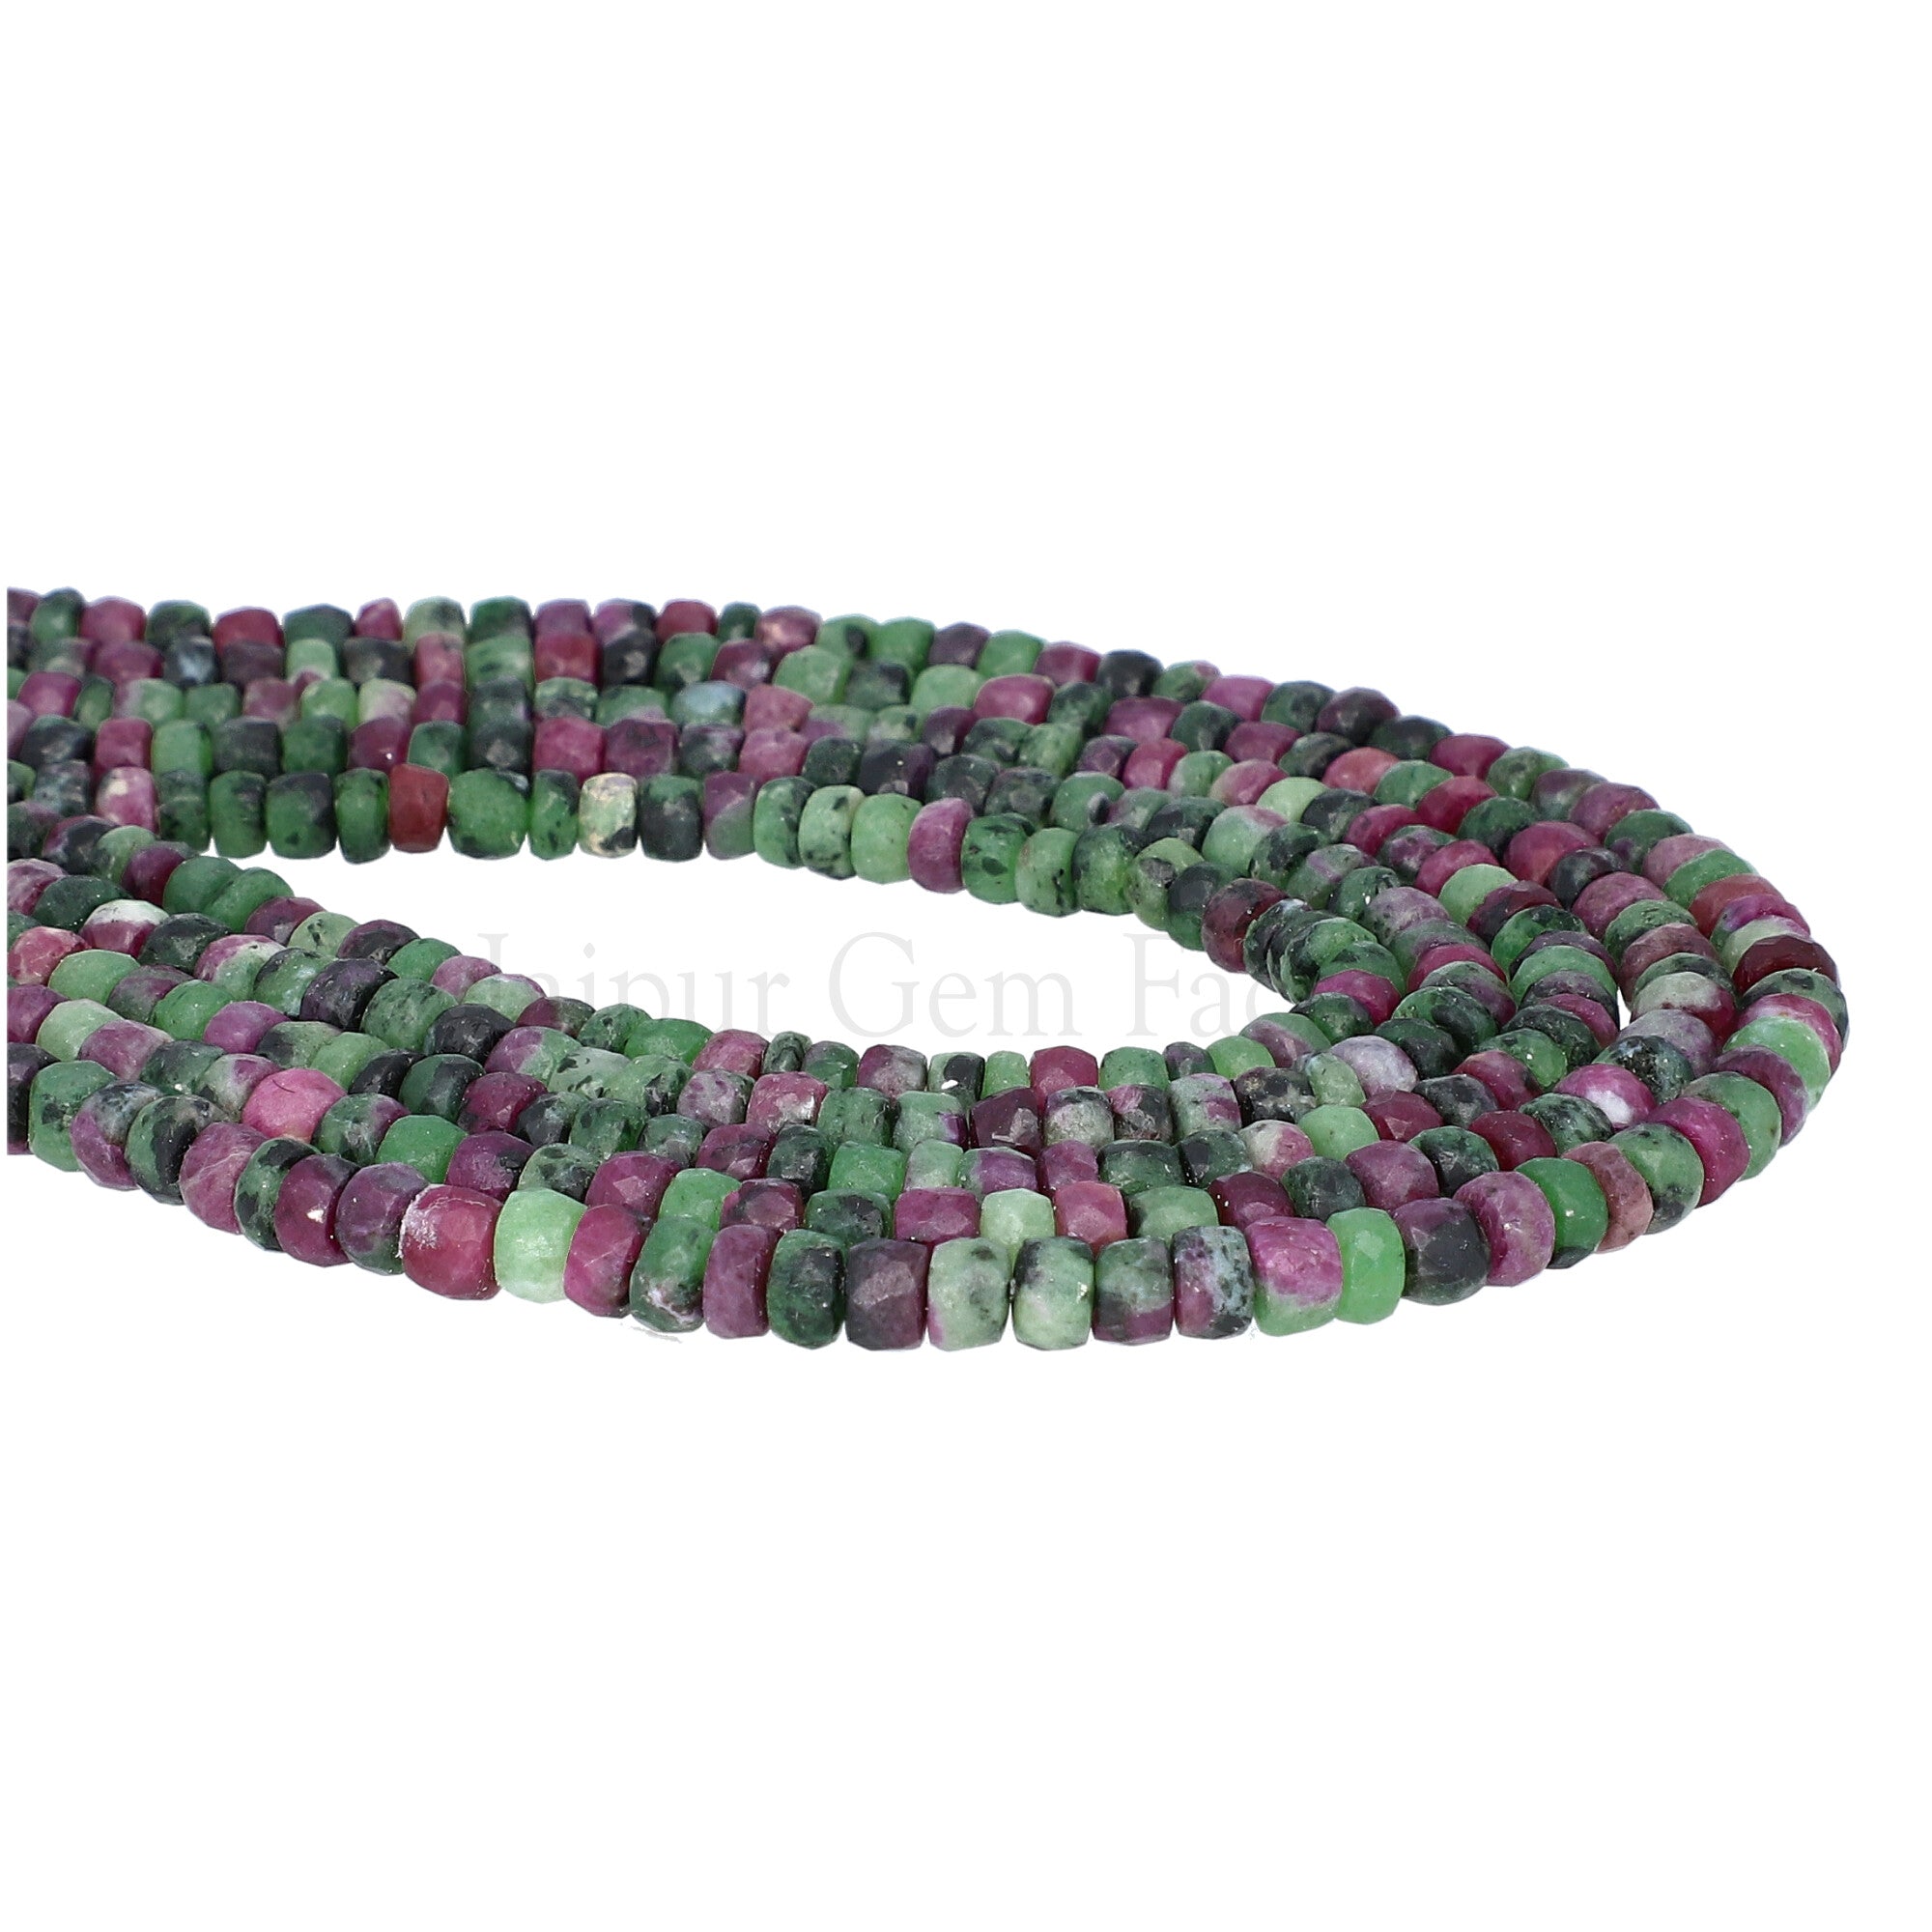 Ruby Zoisite 4.5 To 5 MM Faceted Rondelle Shape Beads Strand 1mm Drill